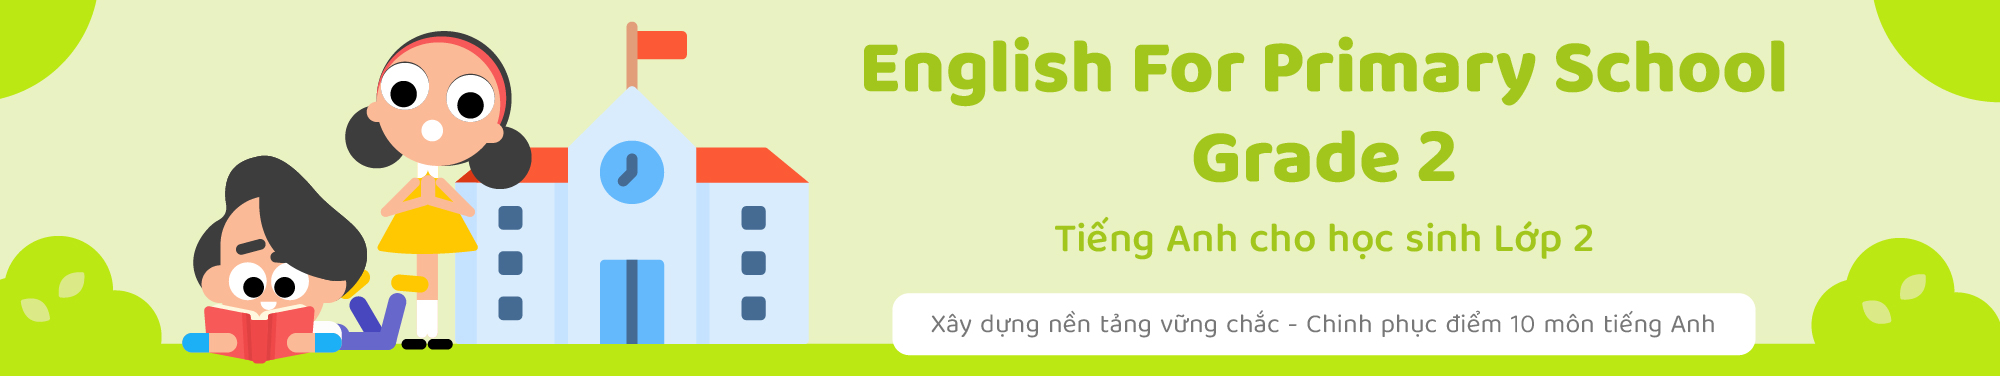 English for Primary School Grade 2 banner